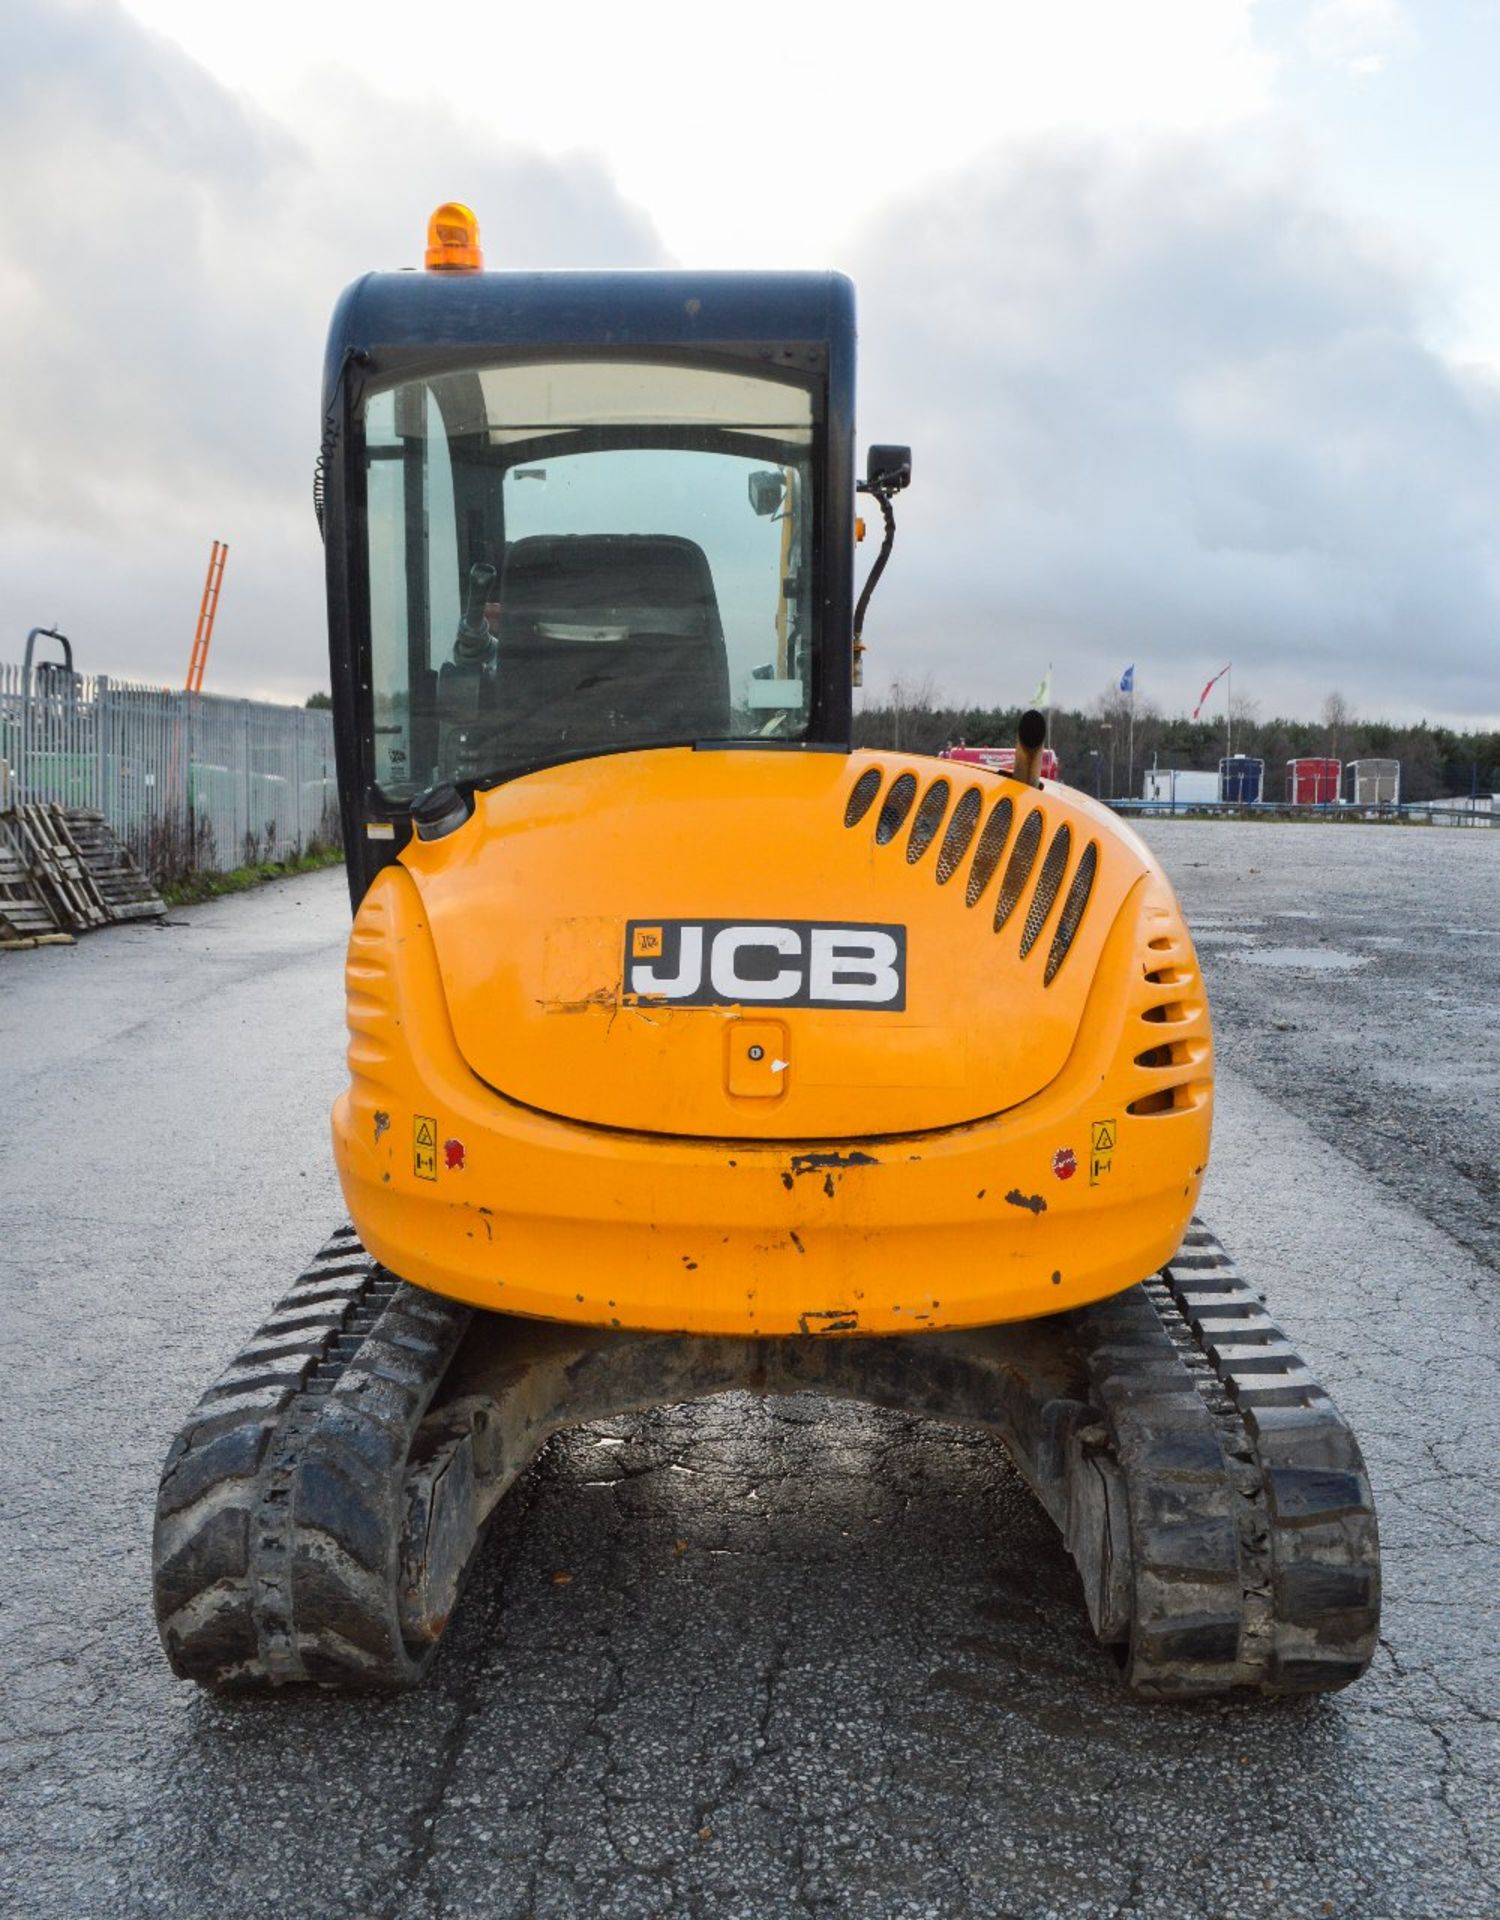 JCB 8050 RTS 5 tonne reduced tail swing rubber tracked mini excavator
Year: 2011
S/N: 1741659 - Image 5 of 12